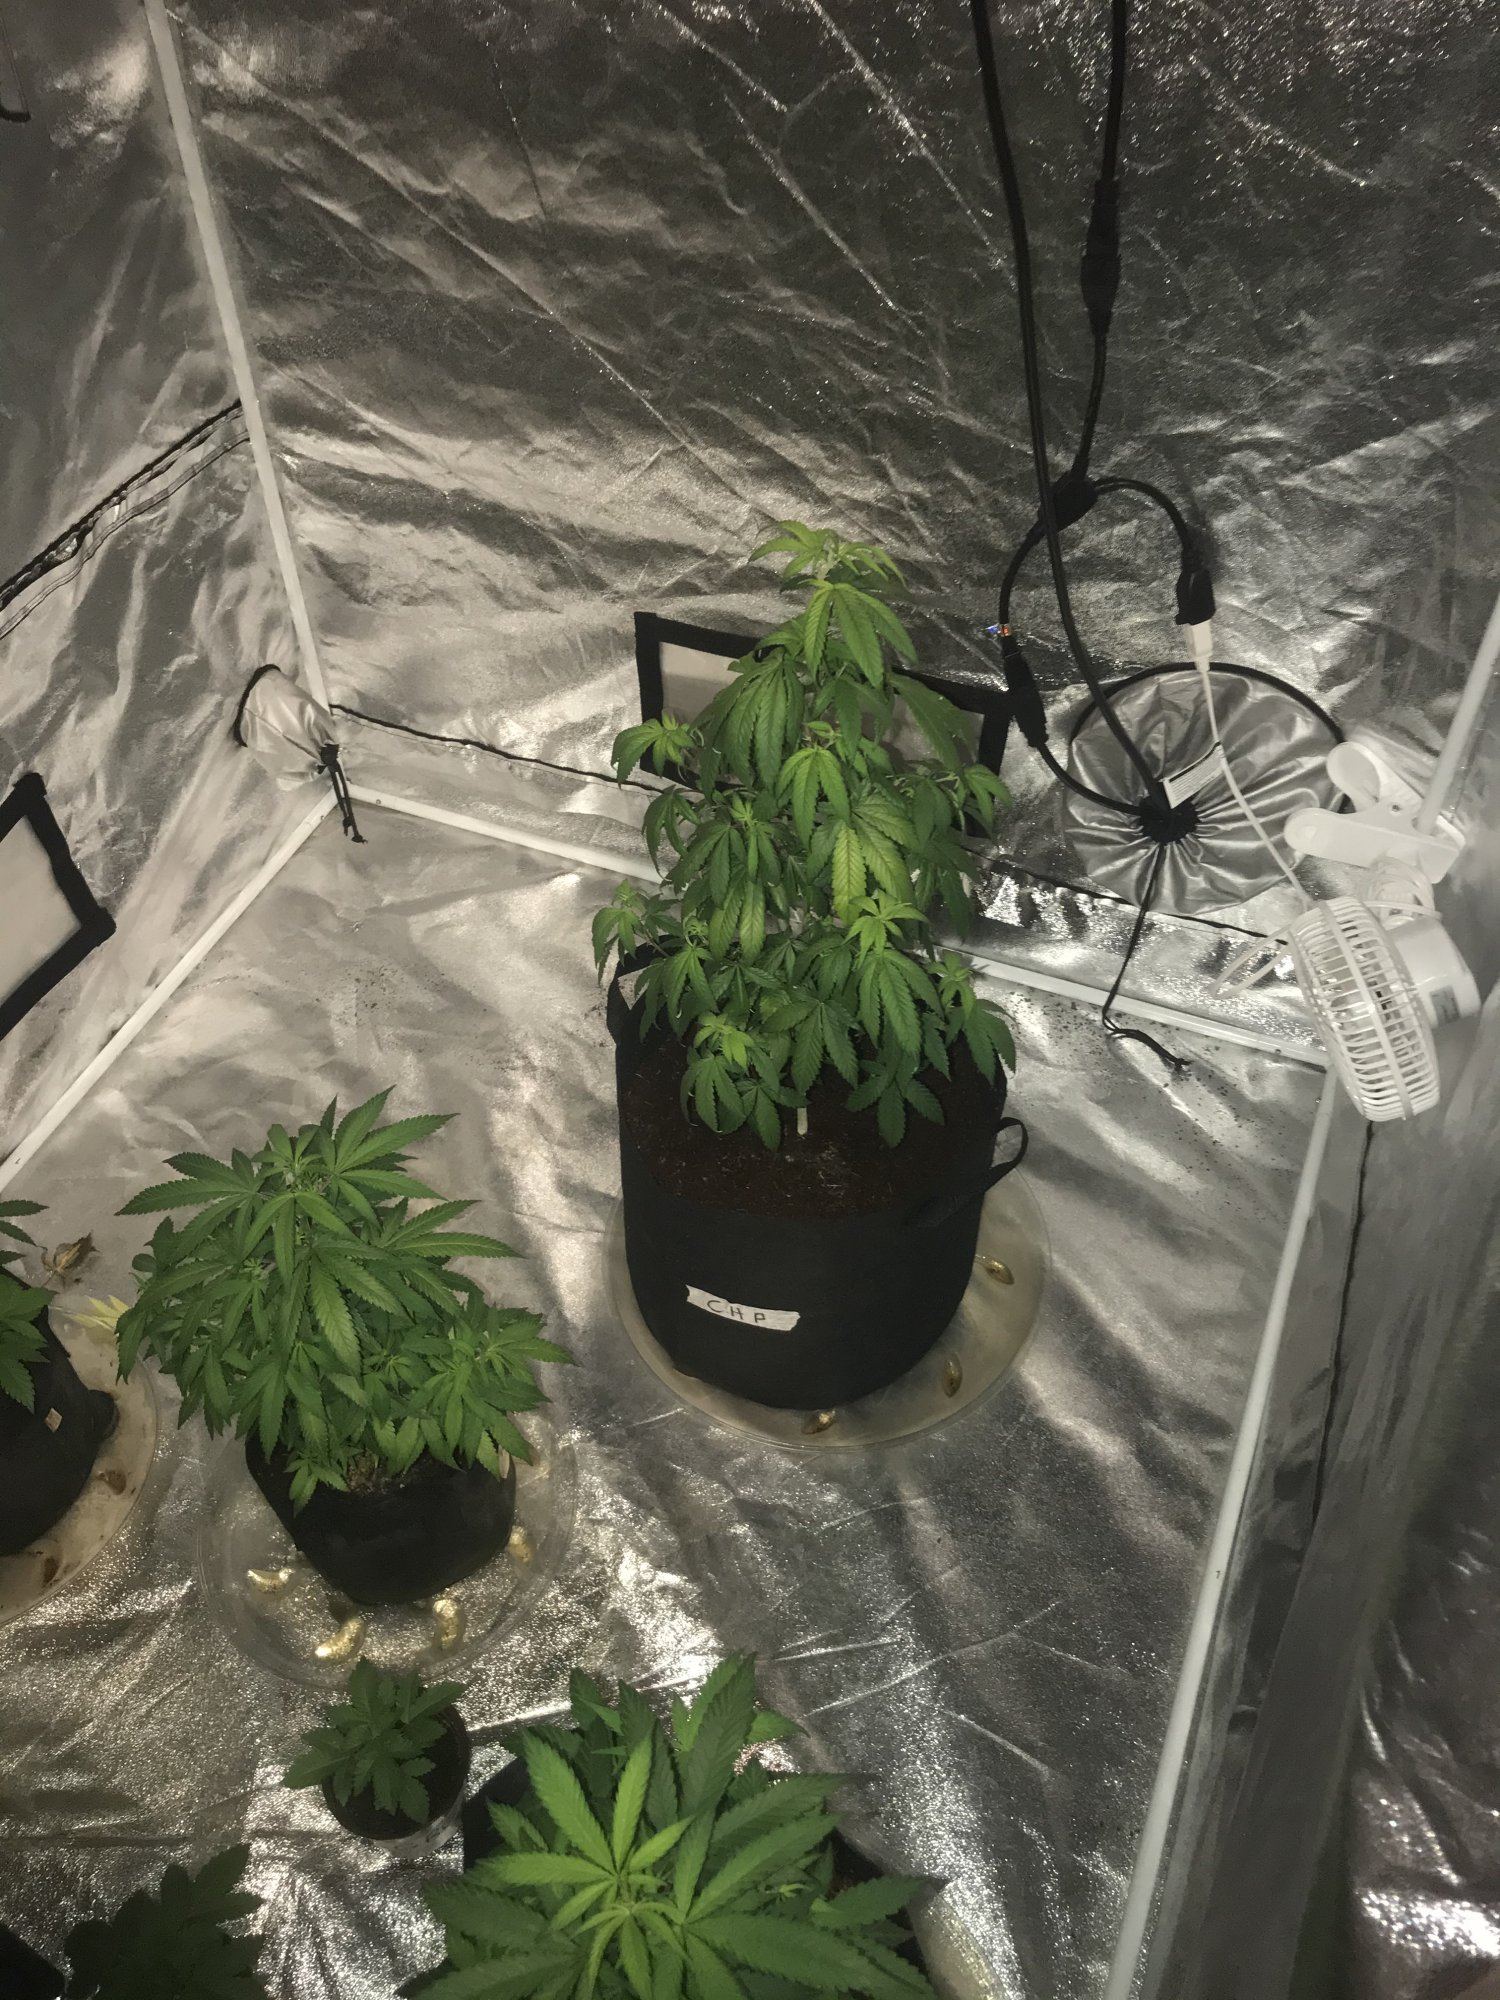 Need help moved house and my plants wont grow good 4